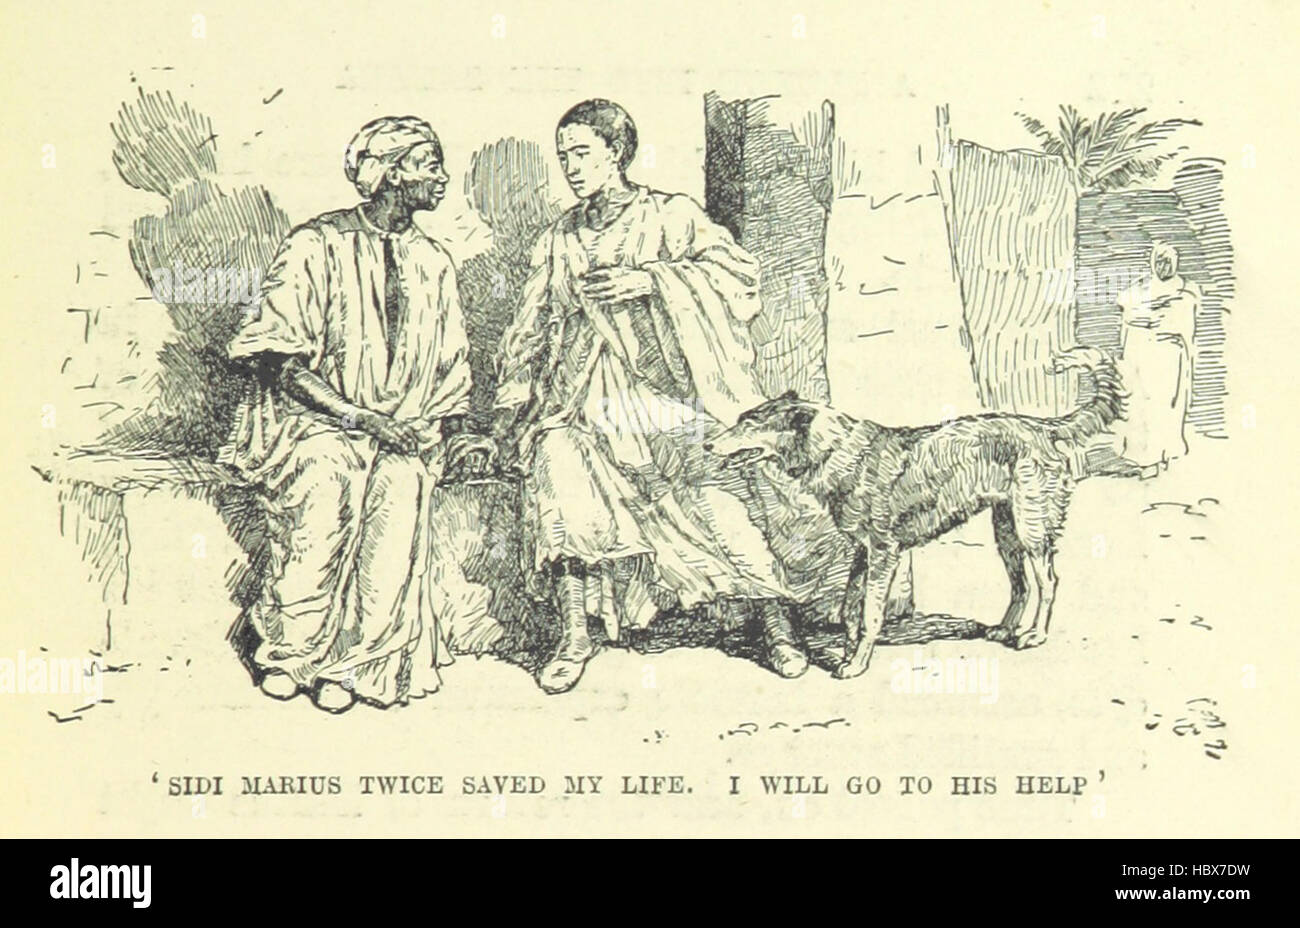 Image taken from page 247 of 'A Plunge into the Sahara. An adventure of to-day ... With illustrations by P. Crampel' Image taken from page 247 of 'A Plunge into the Stock Photo